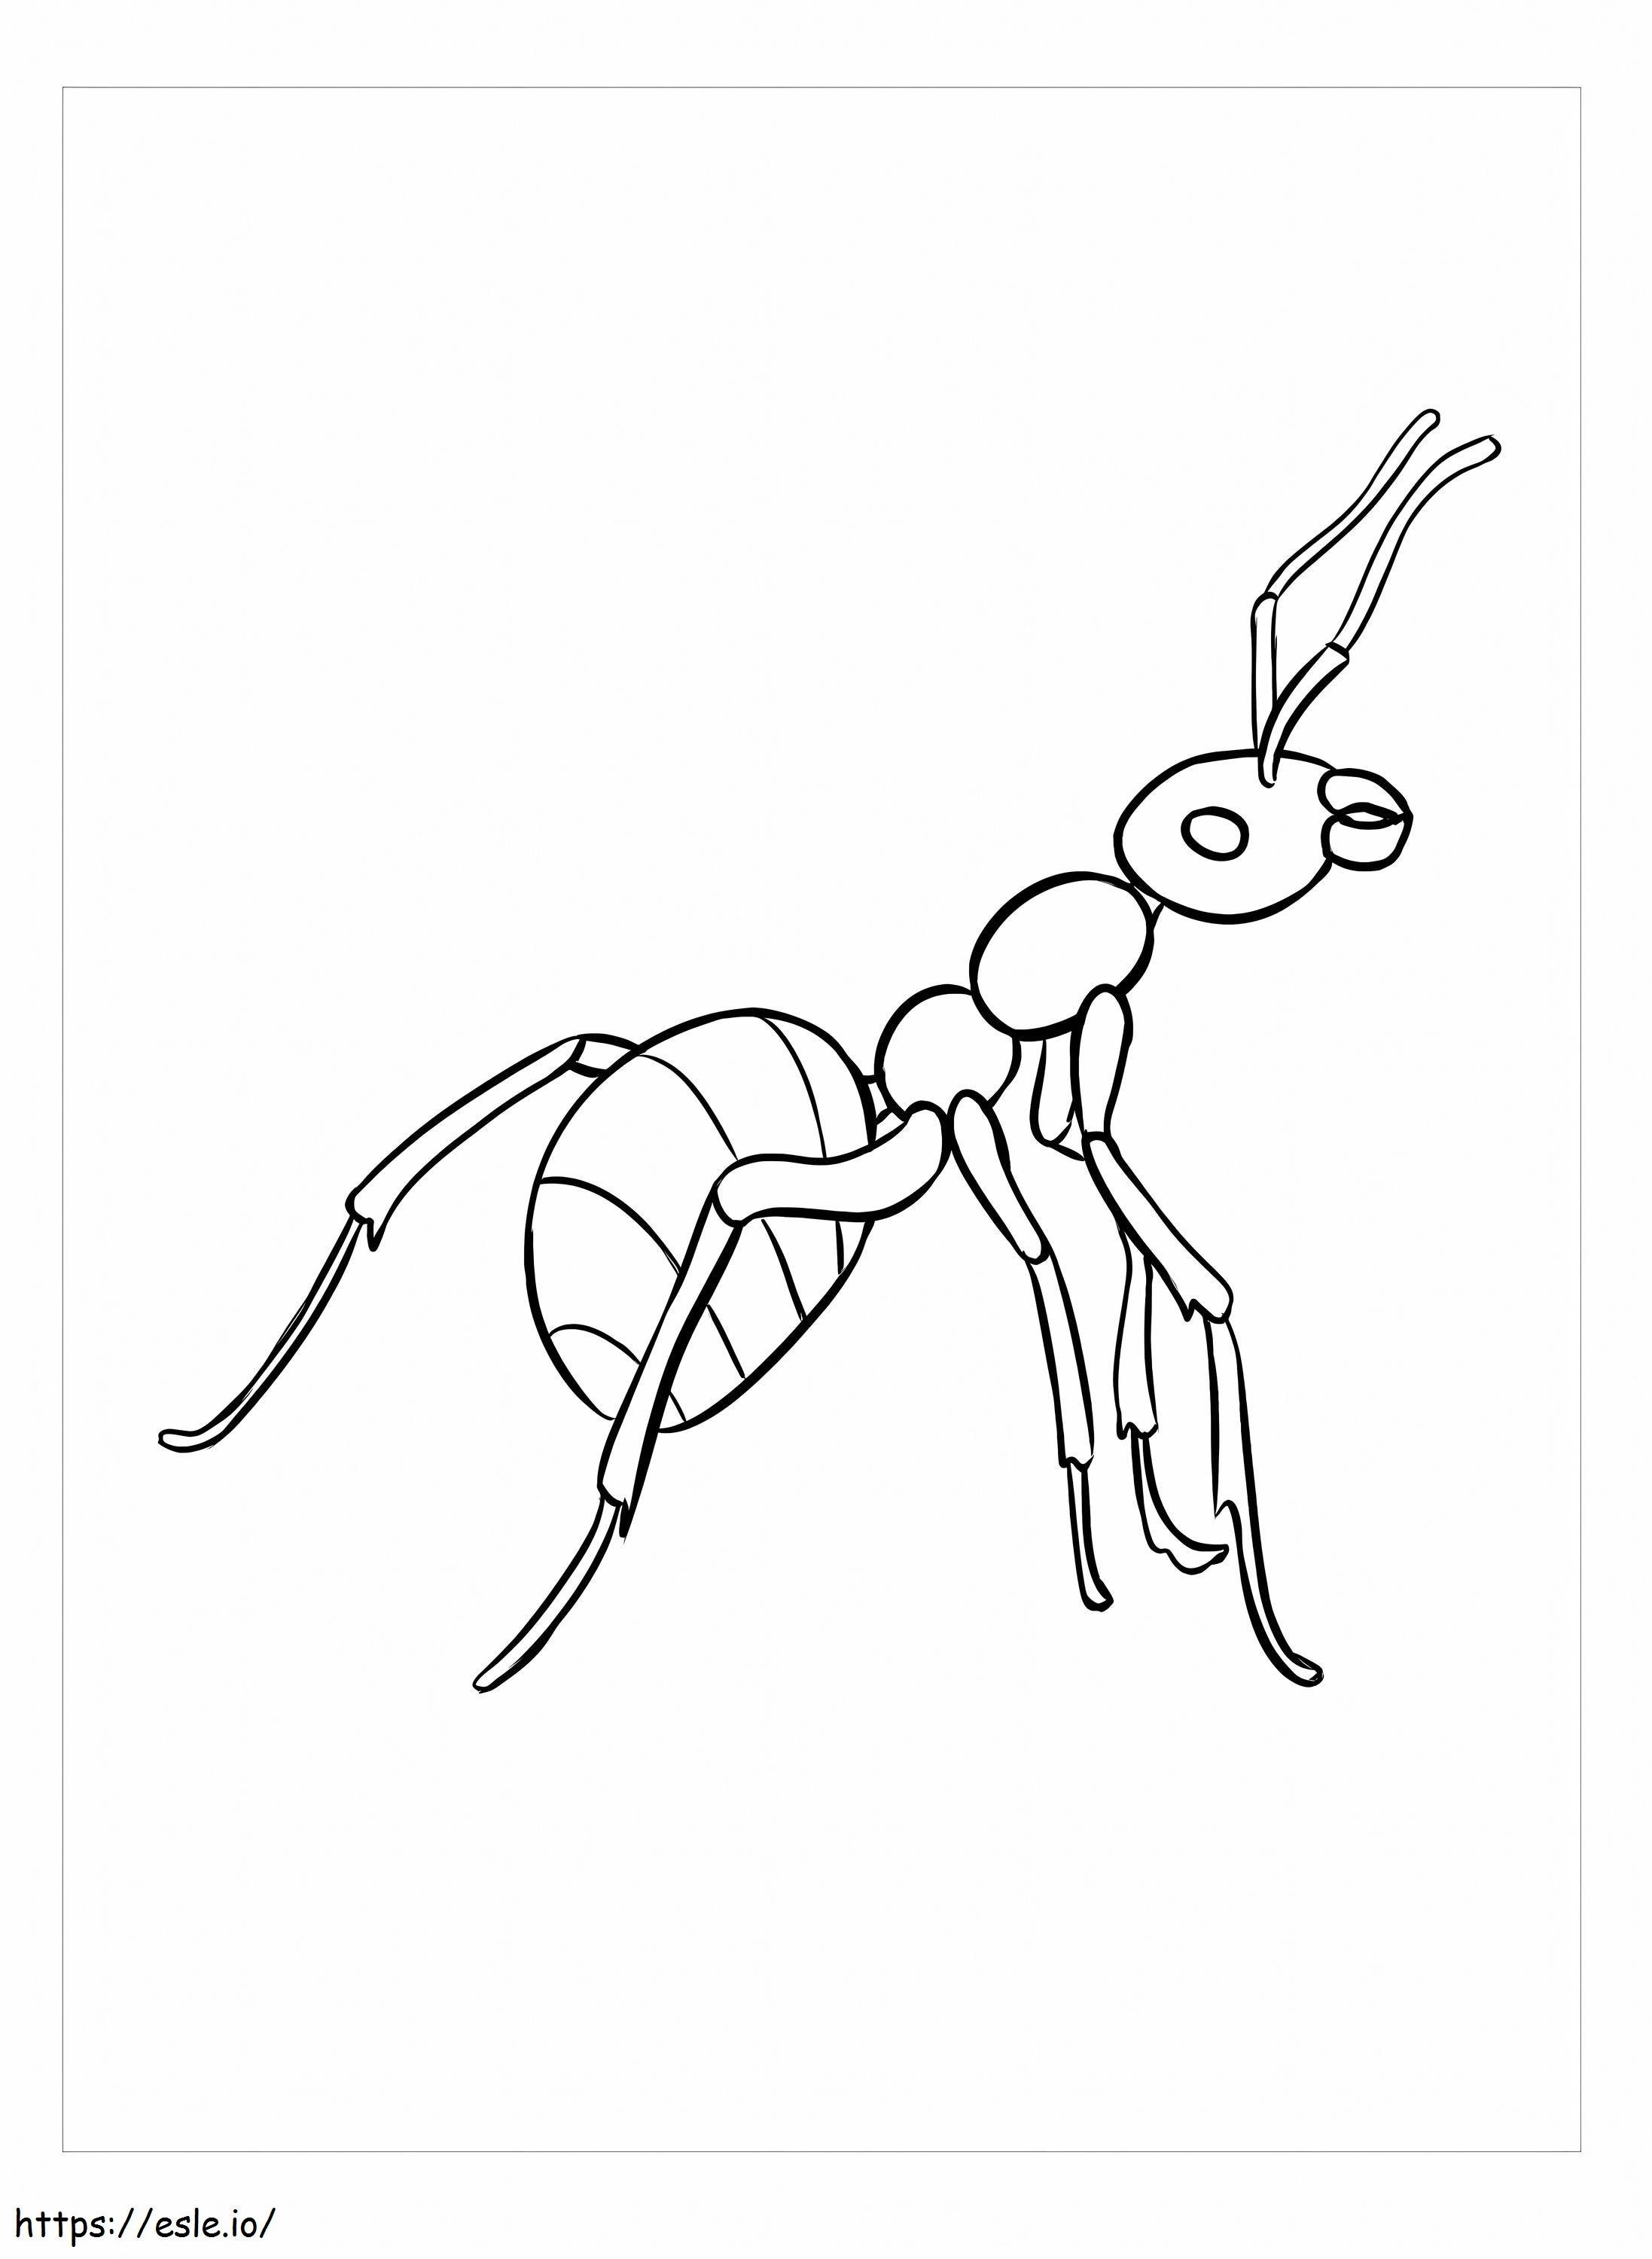 Free Images Of Ants coloring page